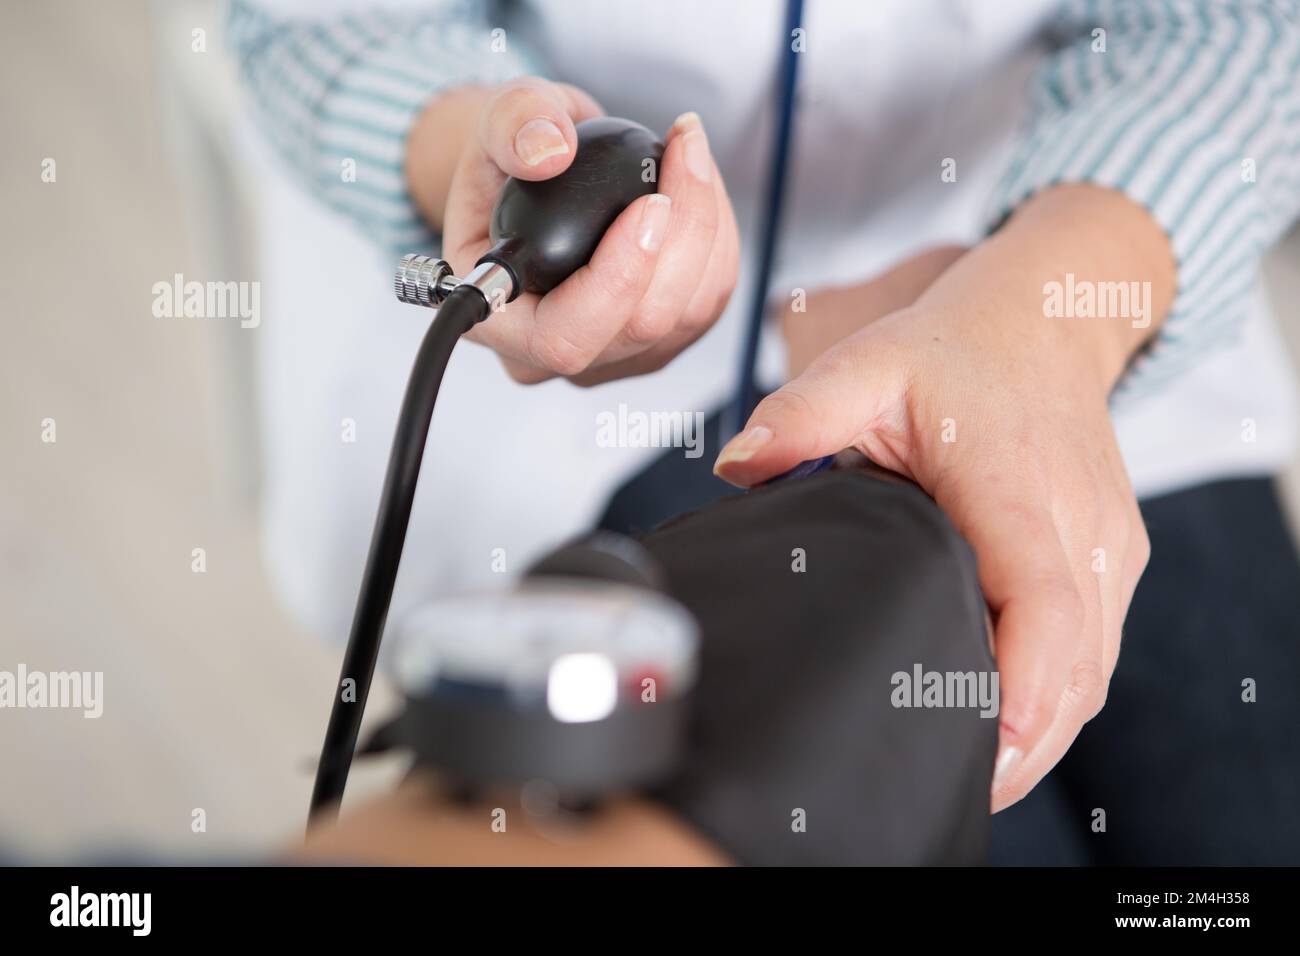 close view of blood pressure cuff being inflated Stock Photo